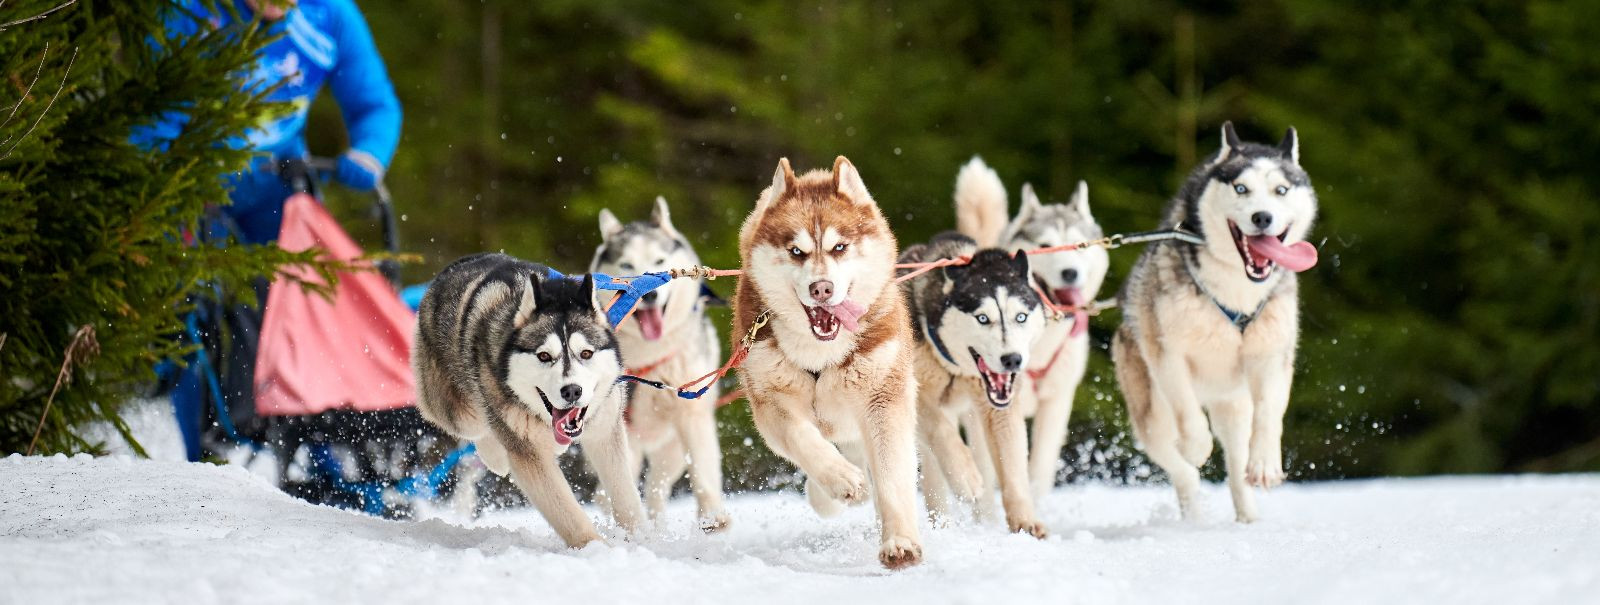 Discover the heart of Estonia's untamed wilderness with HINGEGA LOODUSES OÜ, where adventure beckons and memories await. Our sled dog experiences invite you to 